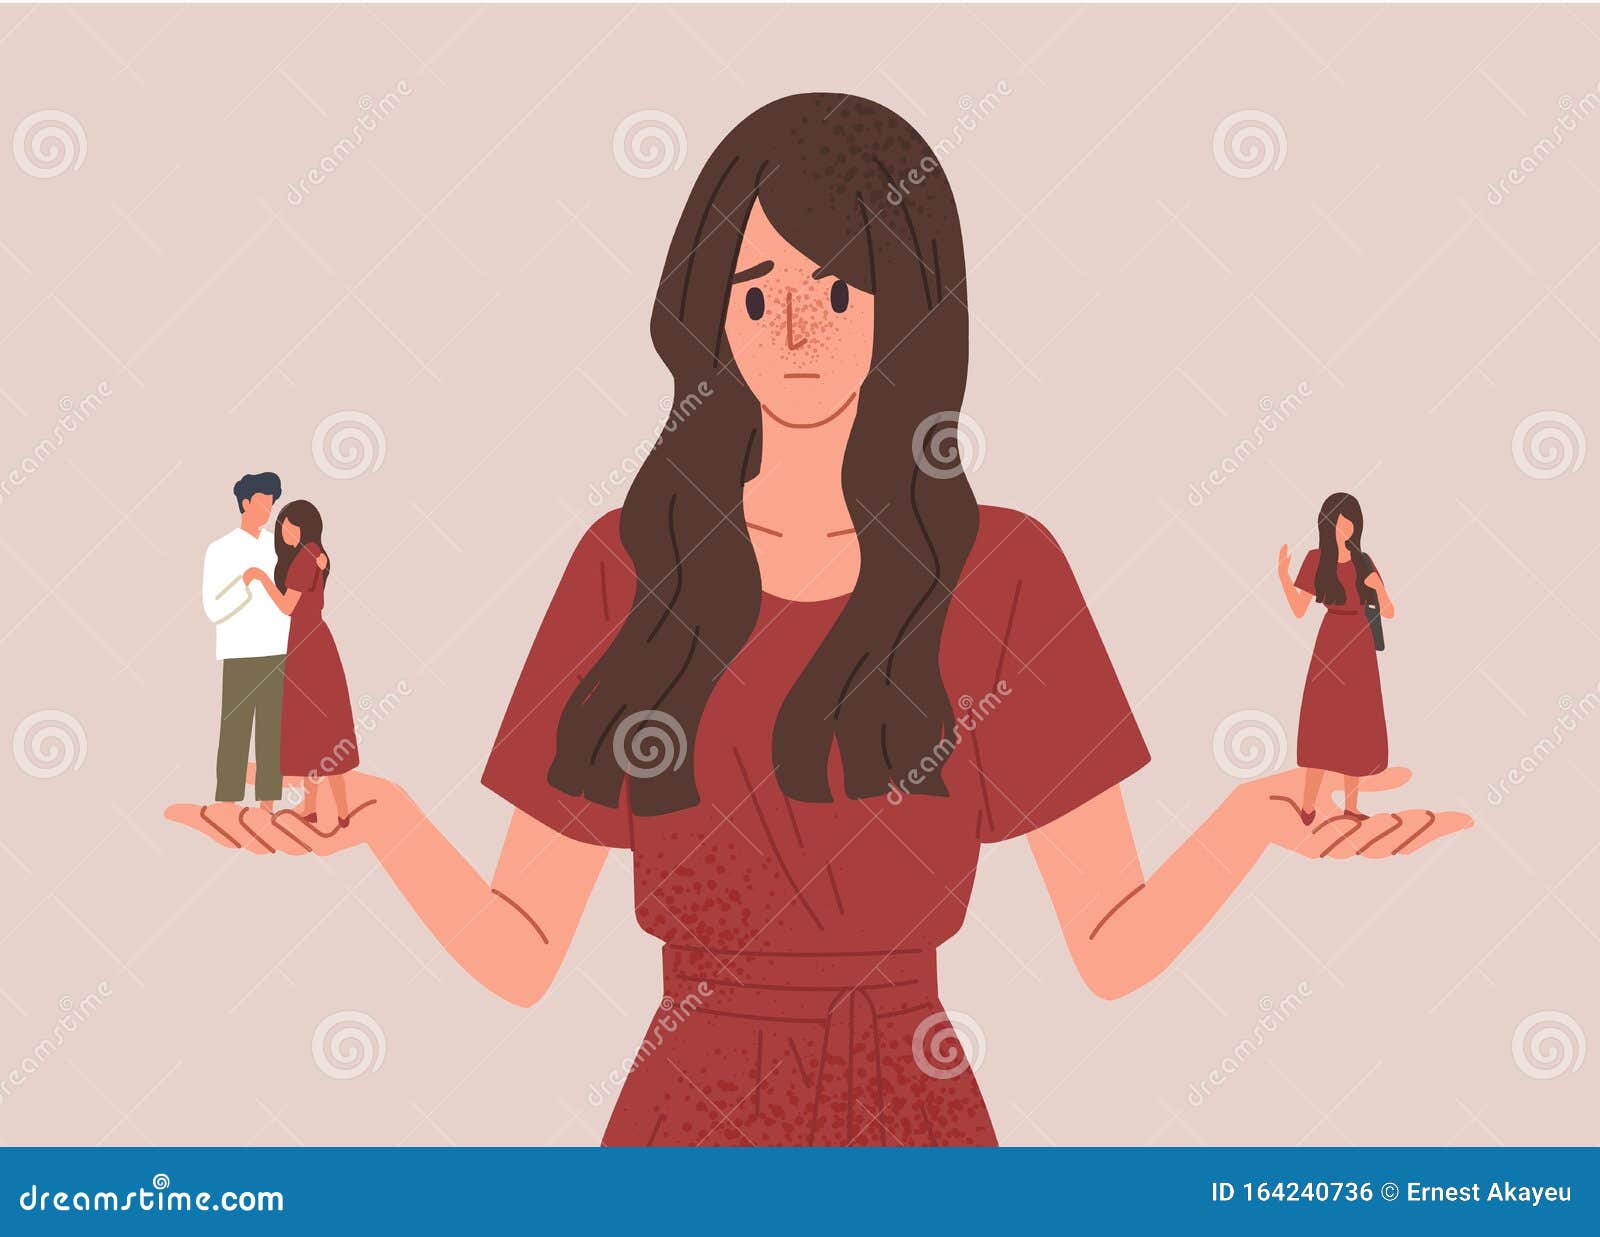 choice between loneliness and relationships concept  . girl hesitating to be alone or start dating